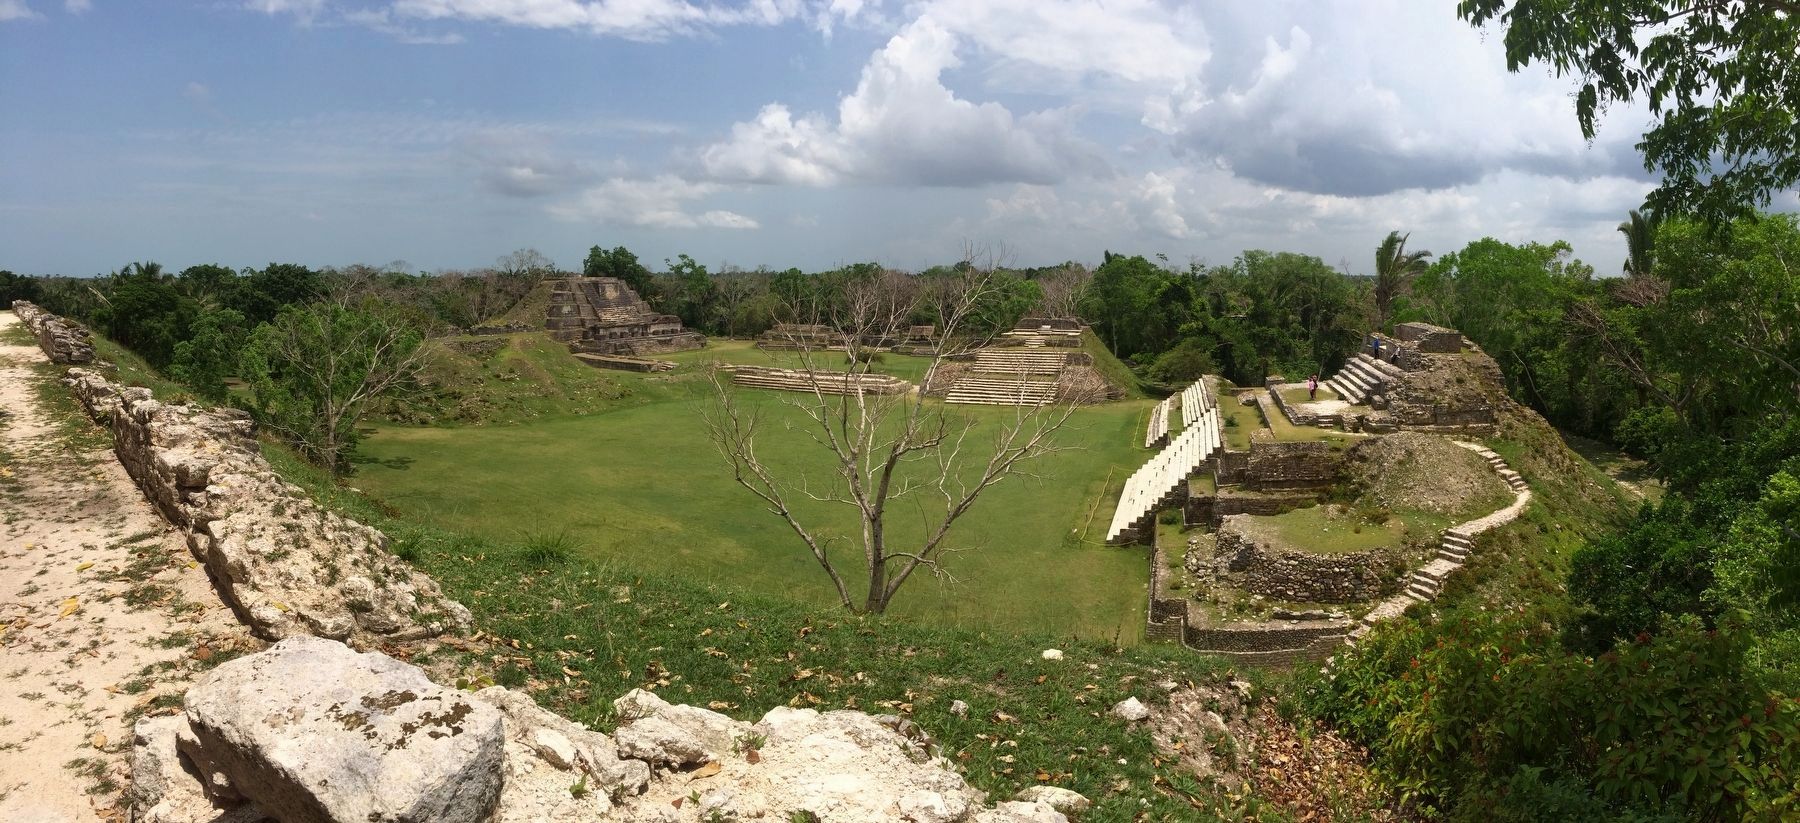 An overview of the Altun Ha site, seen towards the south. image. Click for full size.